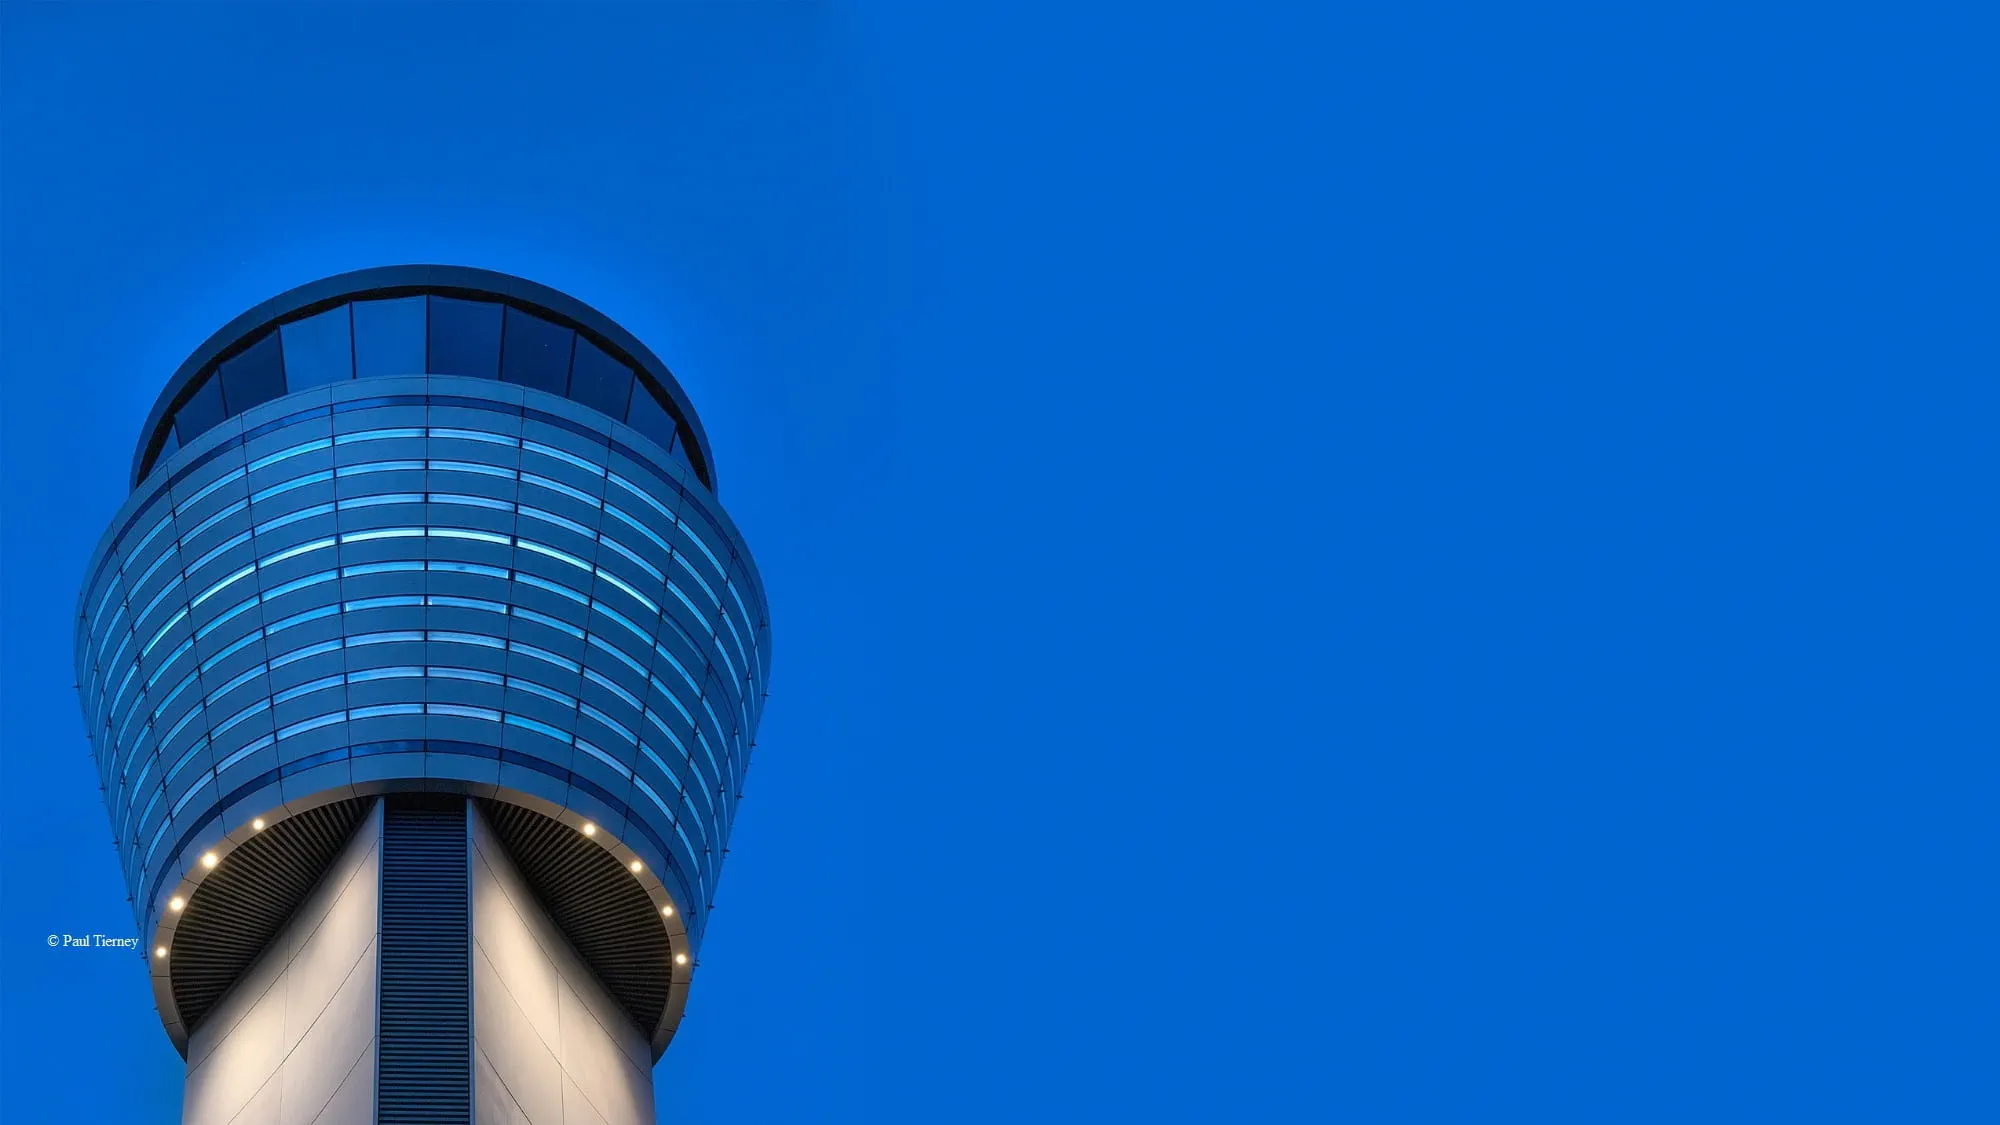 https://www.arup.com/-/media/arup/images/projects/i/iaa-visual-control-tower-dublin-airport/iaa-visual-control-tower-lightsc-paul-tierney2000x1125--with-copyright.jpg?h=1125&w=2000&hash=456131B3F903CAE9517230E5C845E0AF